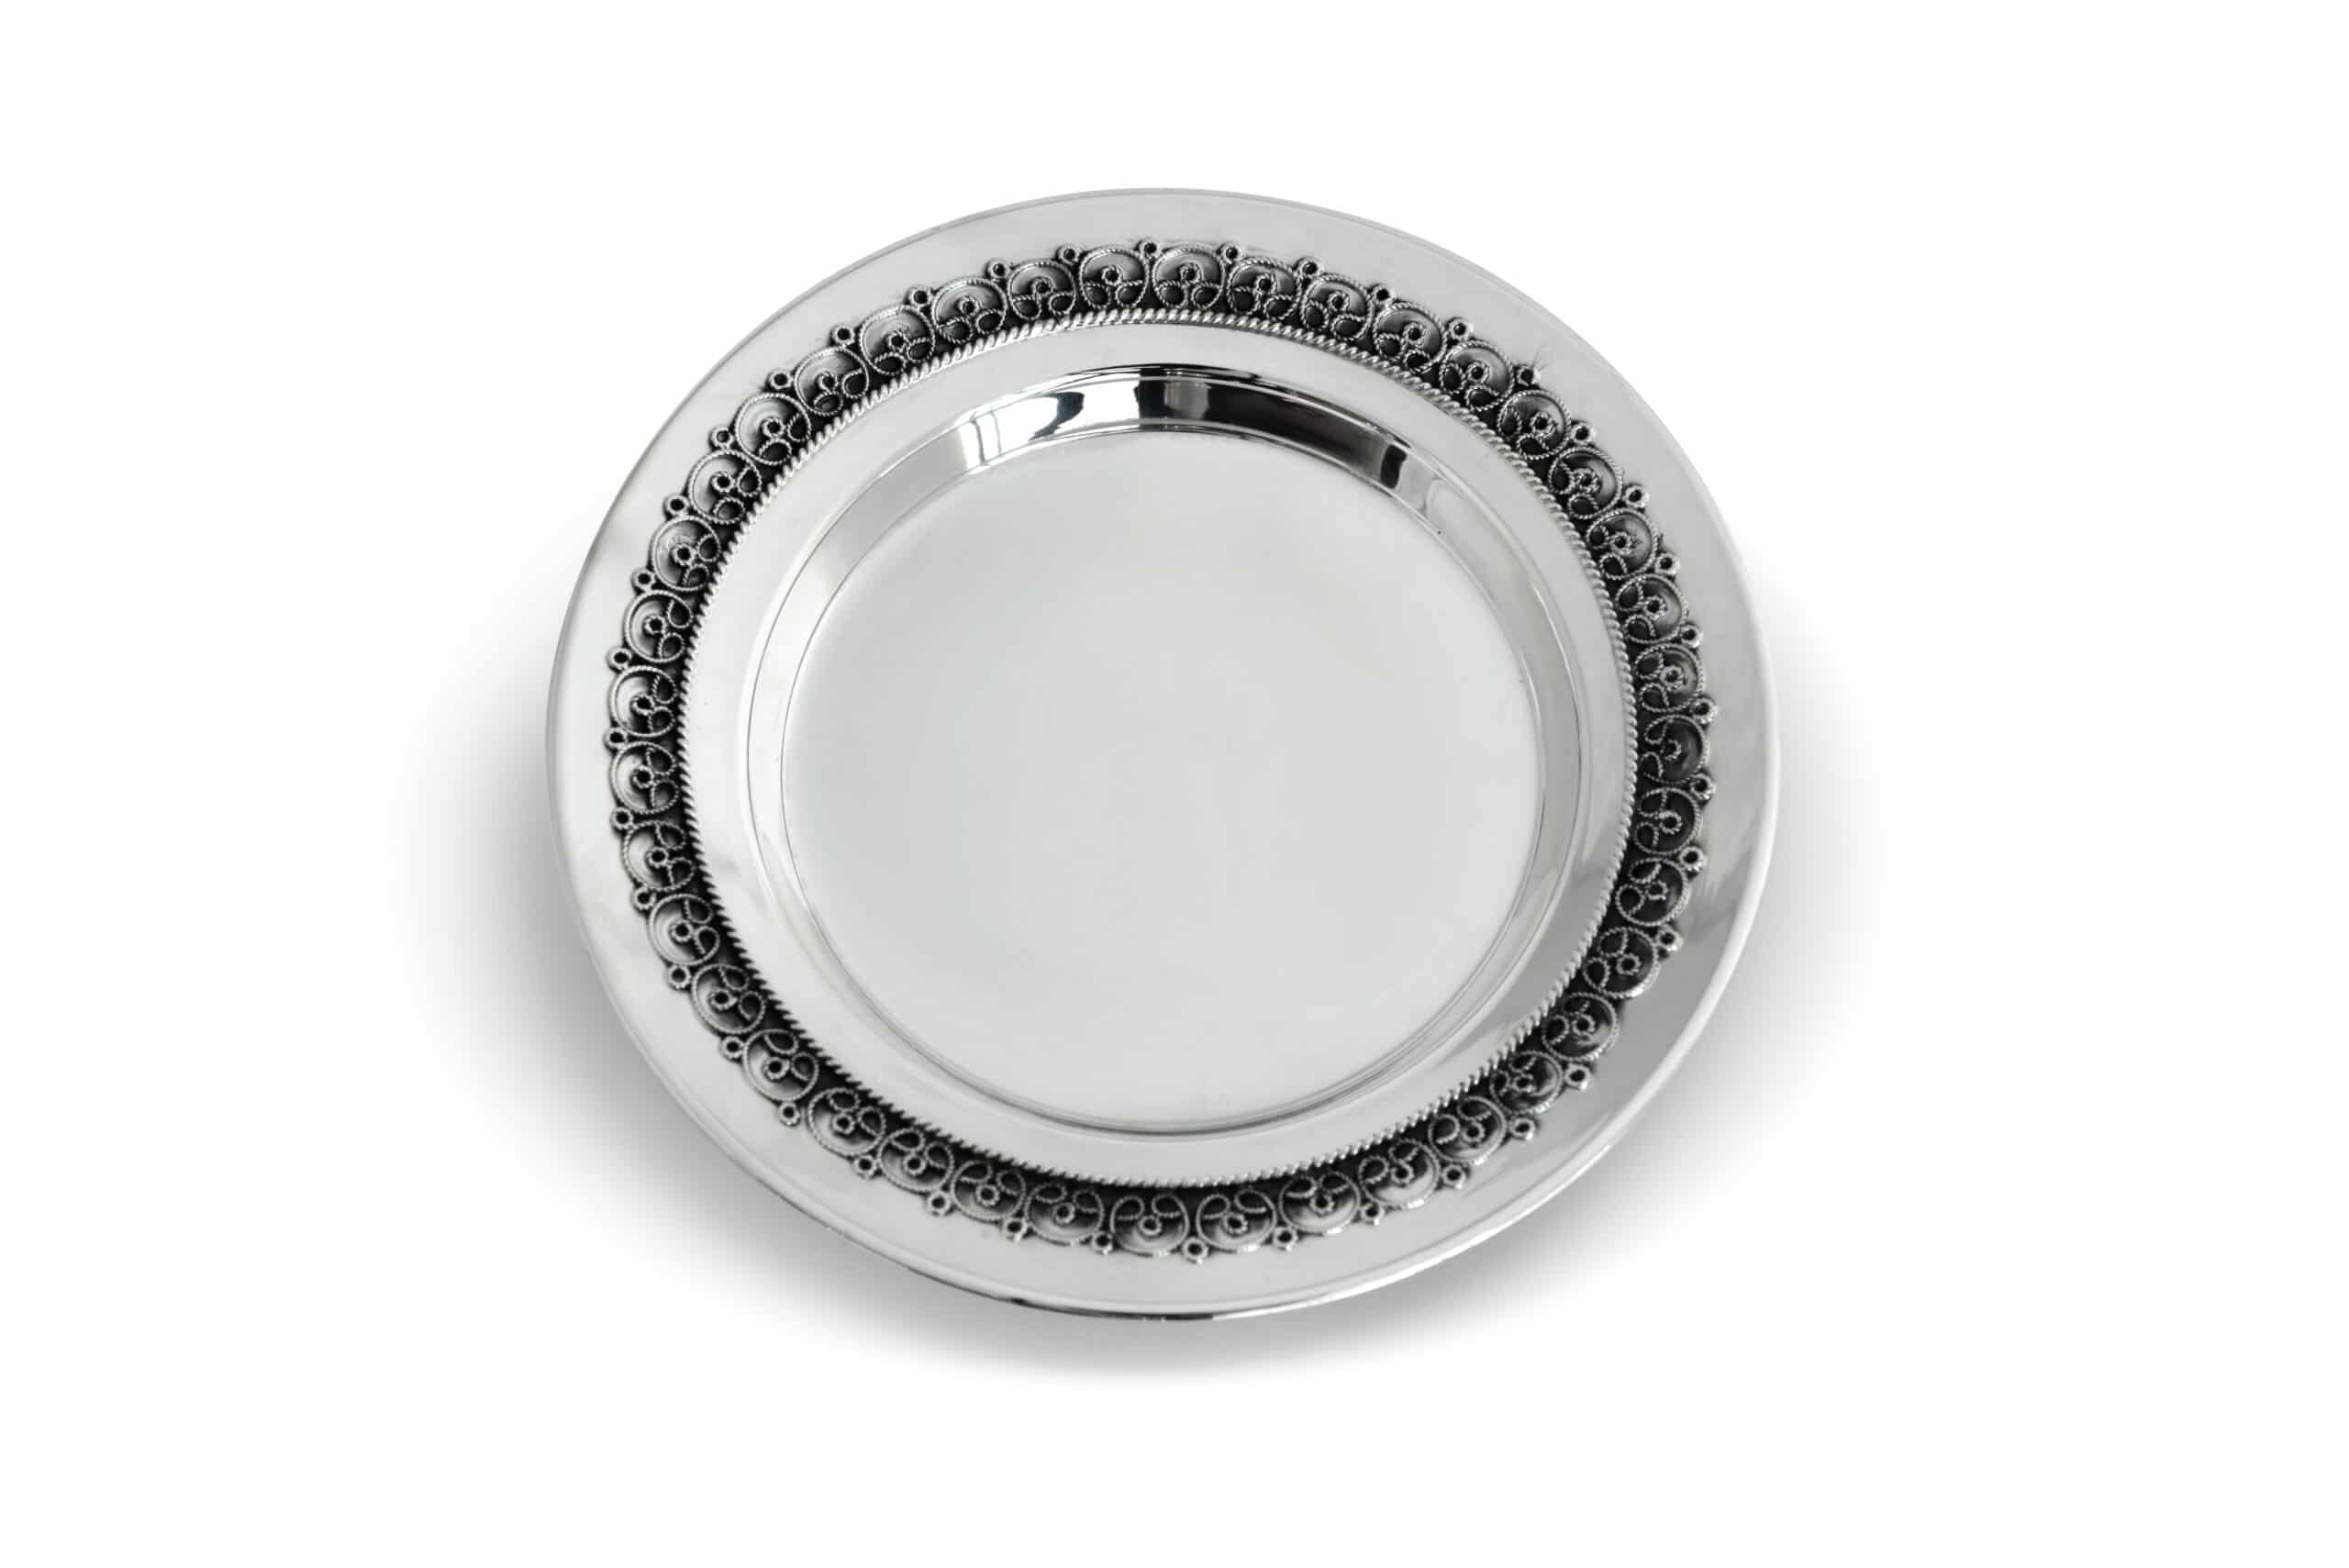 Filigree 925 Sterling Silver Plate for Kiddush Cup